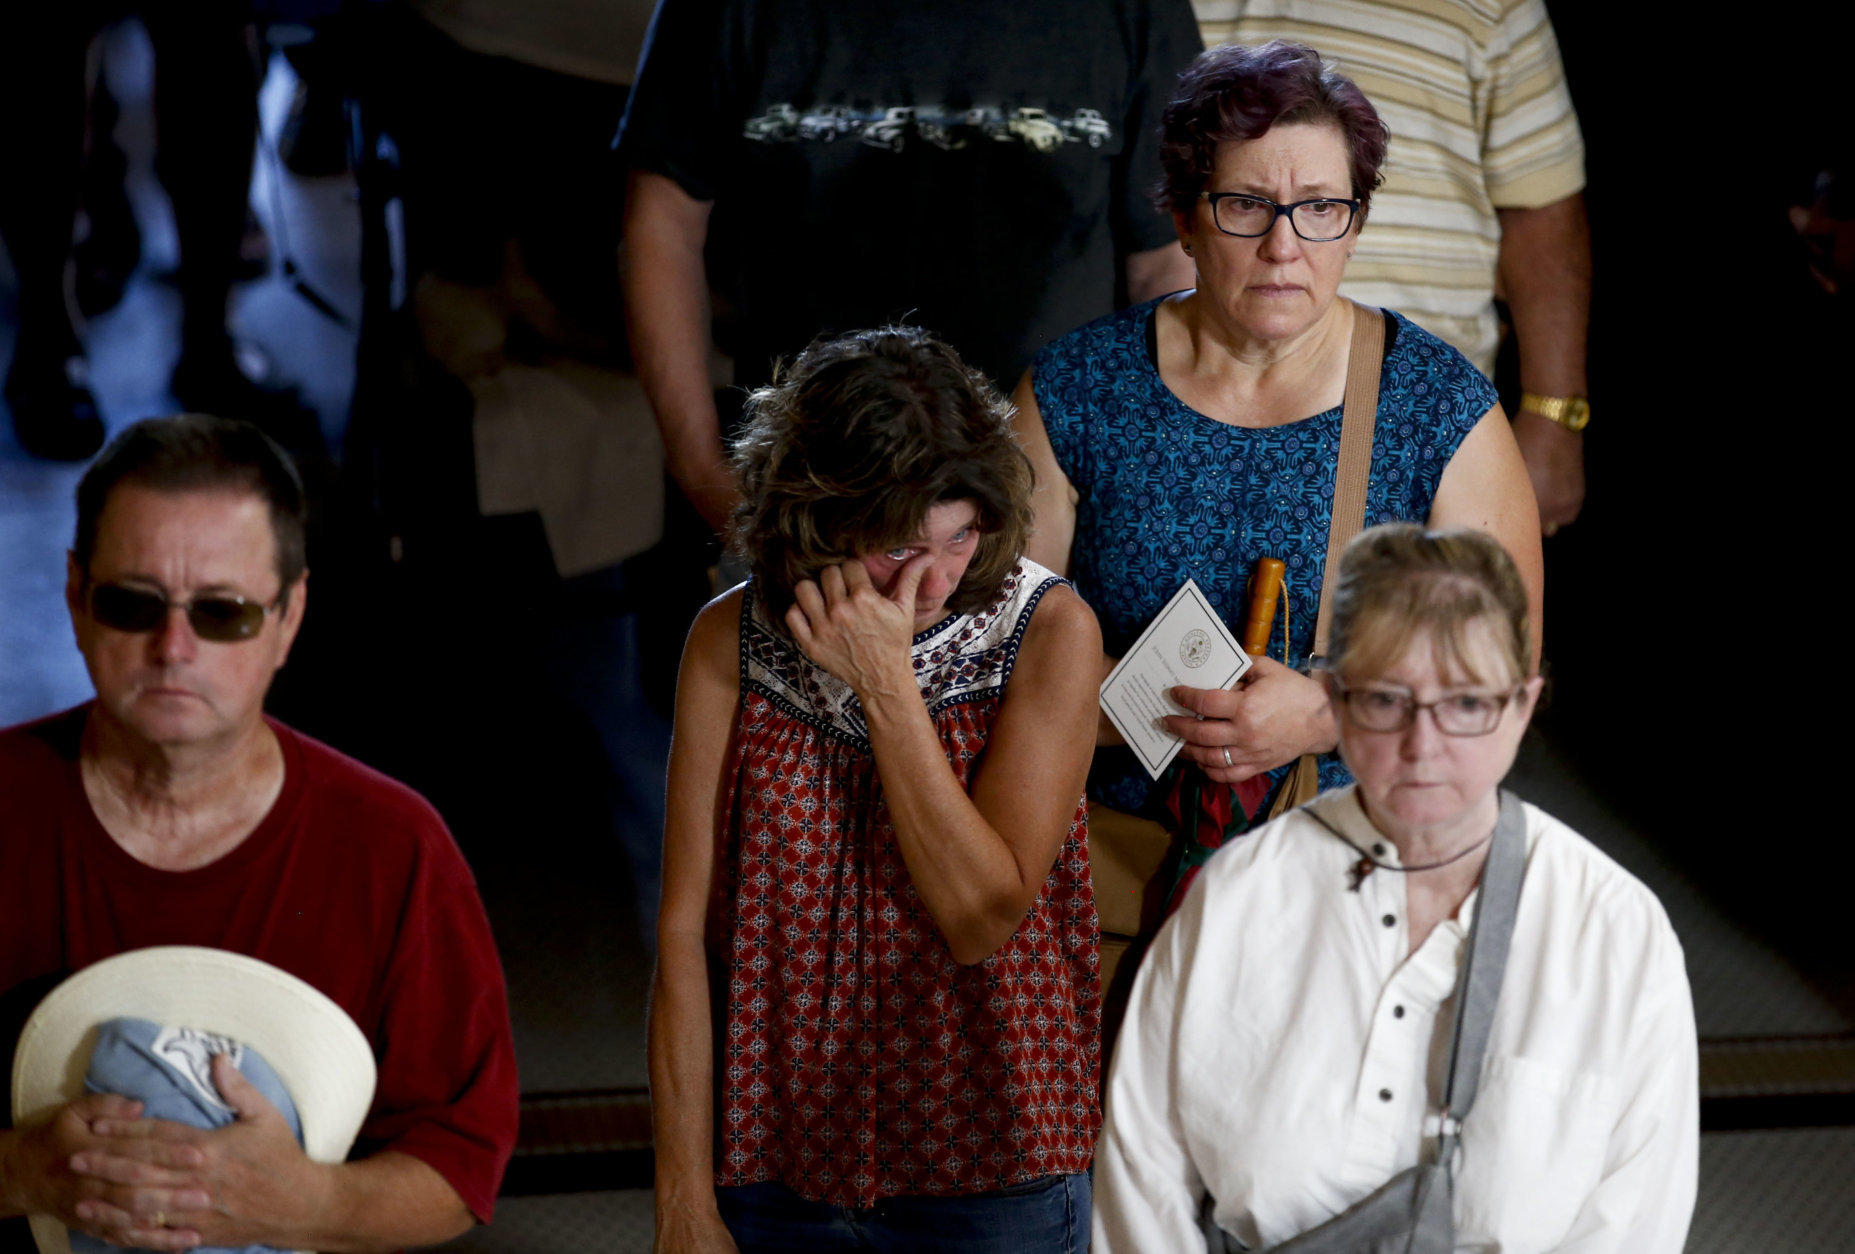 Members of the public line up to pay their respects for Sen. John McCain during a viewing at the Arizona Capitol on Wednesday, Aug. 29, 2018, in Phoenix. (AP Photo/Ross D. Franklin)